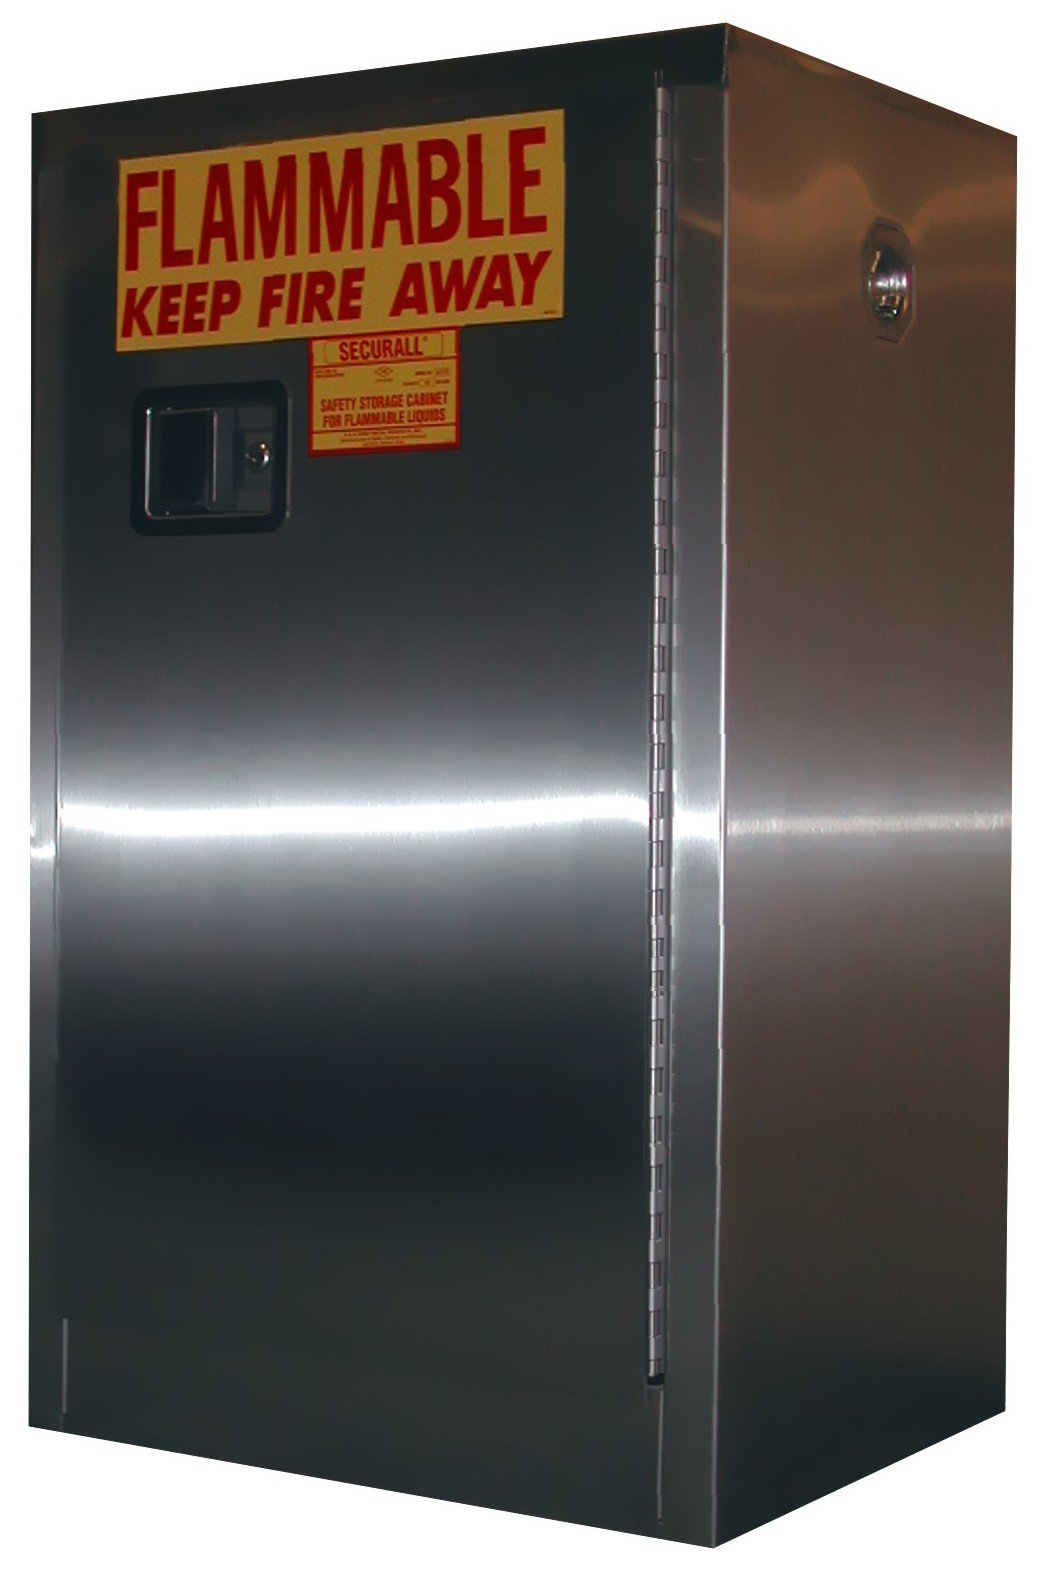 A105-SS Stainless Steel Flammable Storage Cabinet - 12 Gal. Storage Capacity